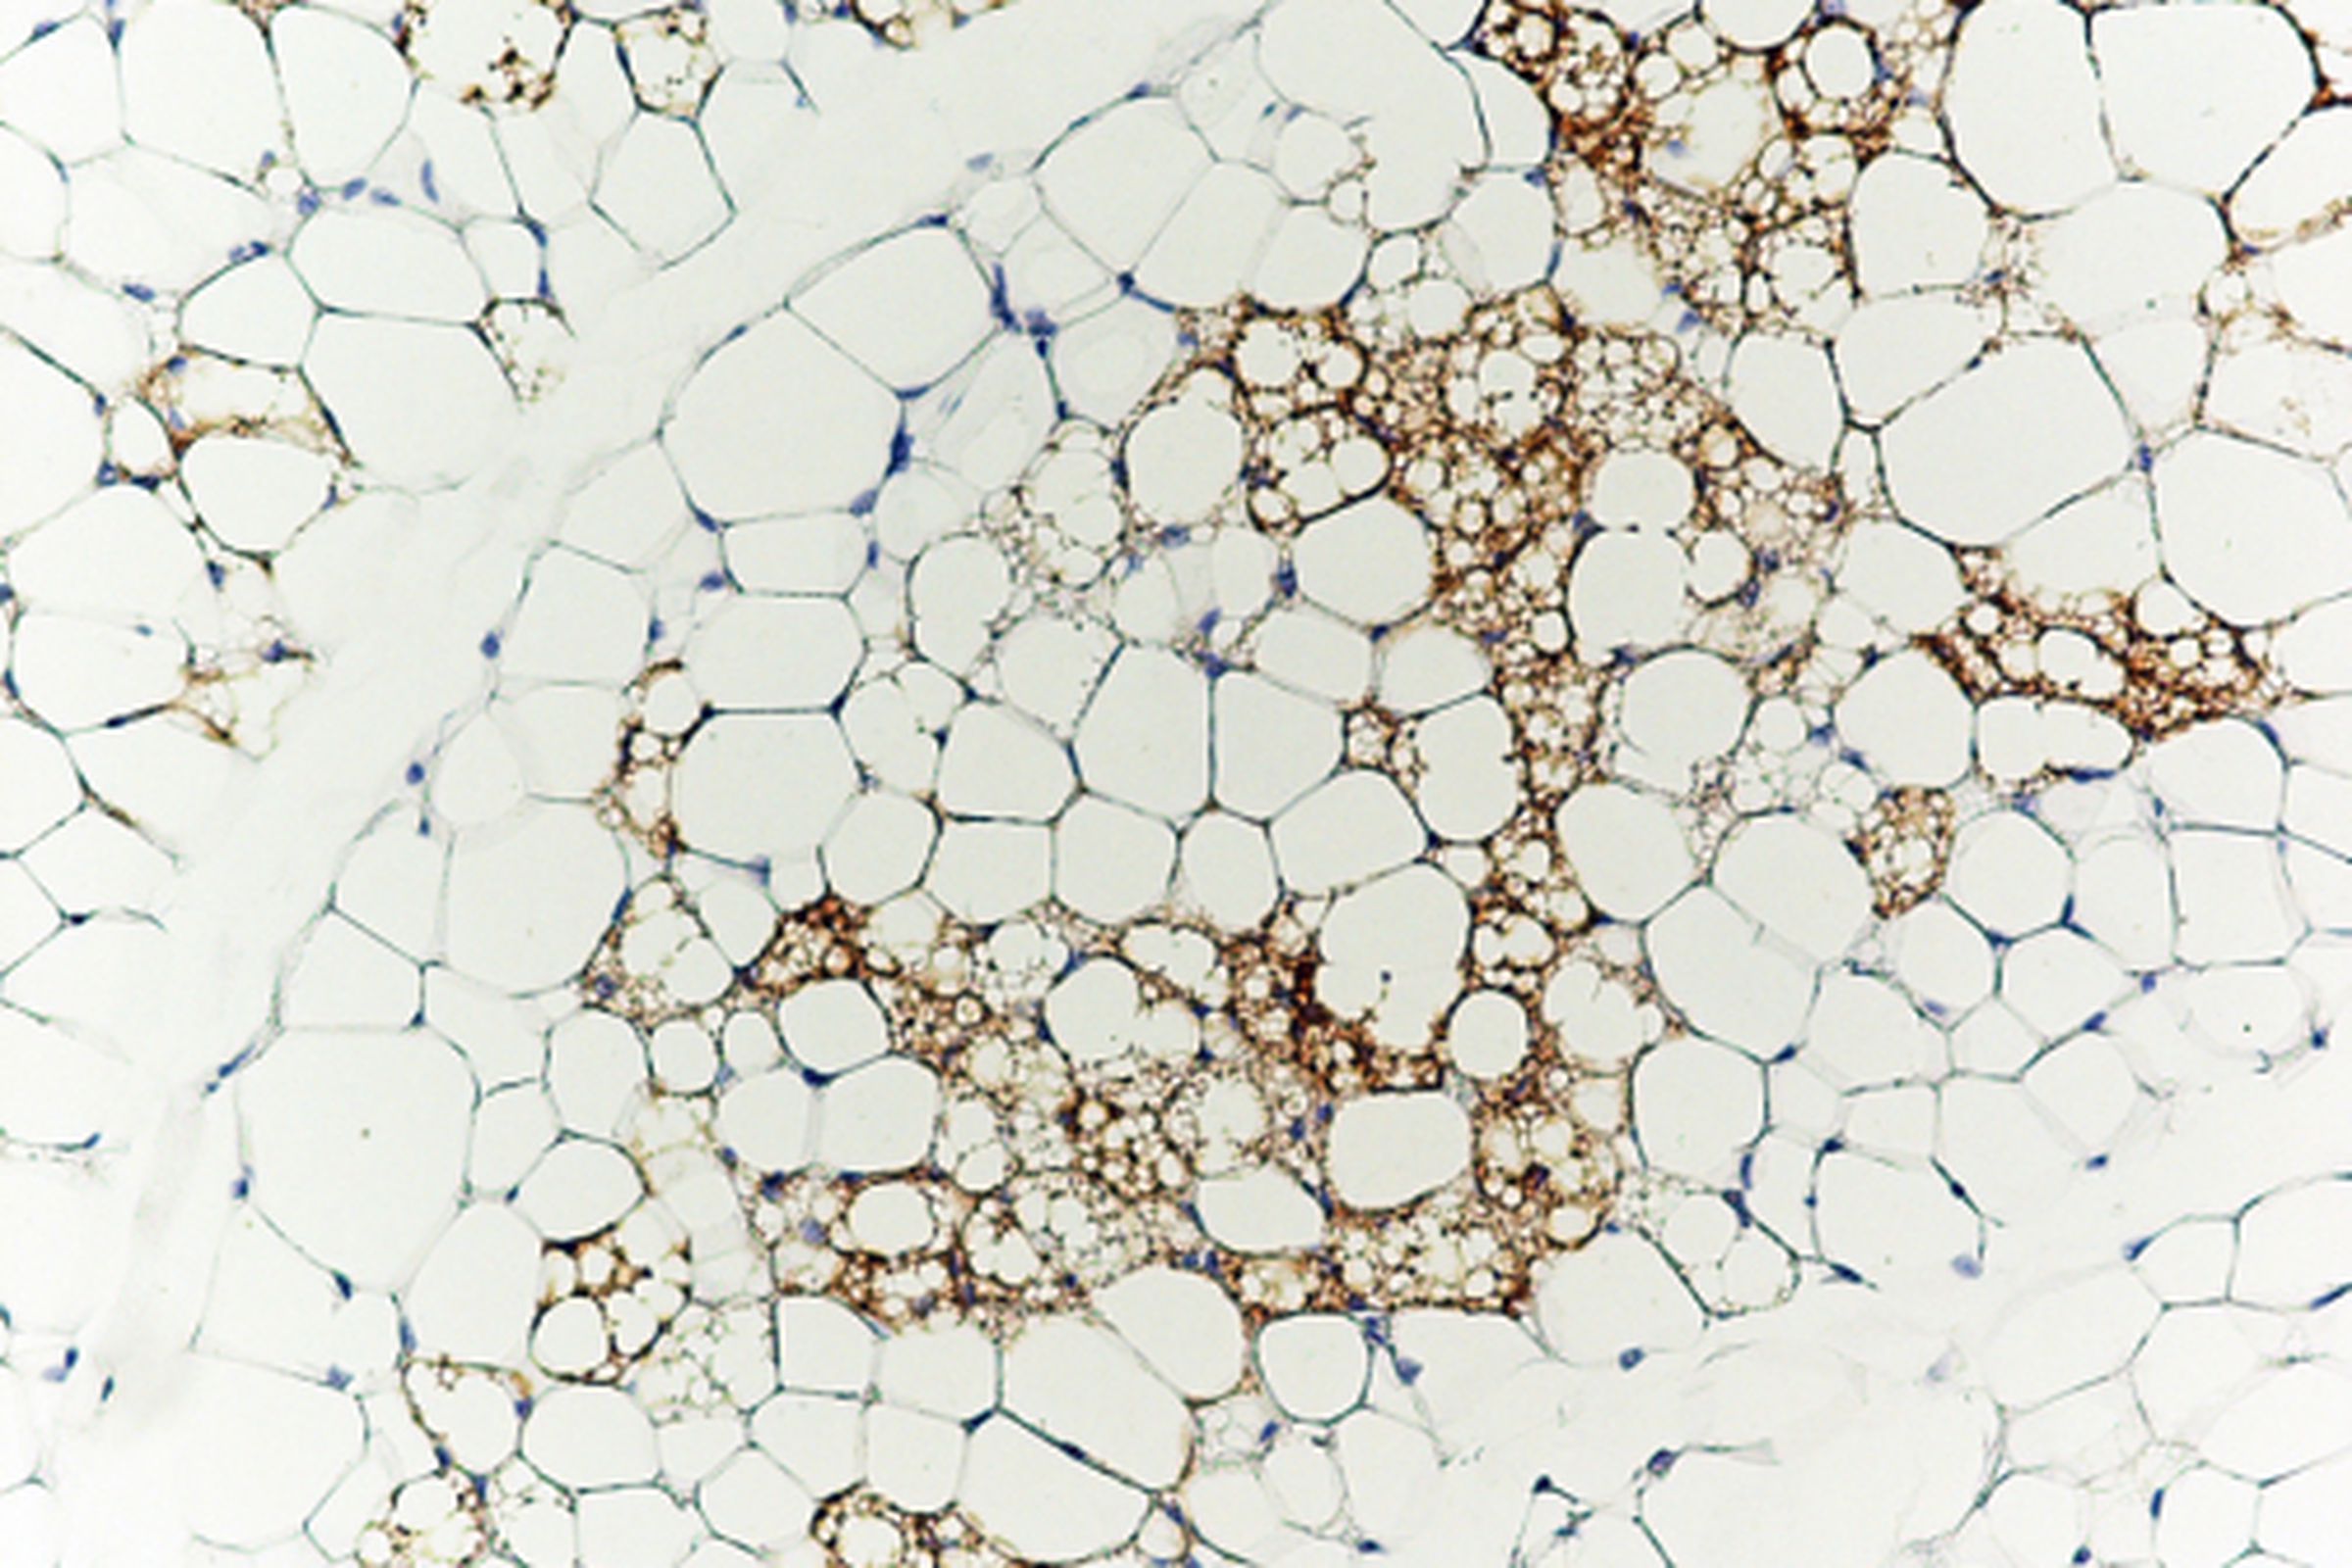  Brown fat cells (stained brown with antibodies against the brown fat-specific protein Ucp1) nestled in amongst white fat cells.